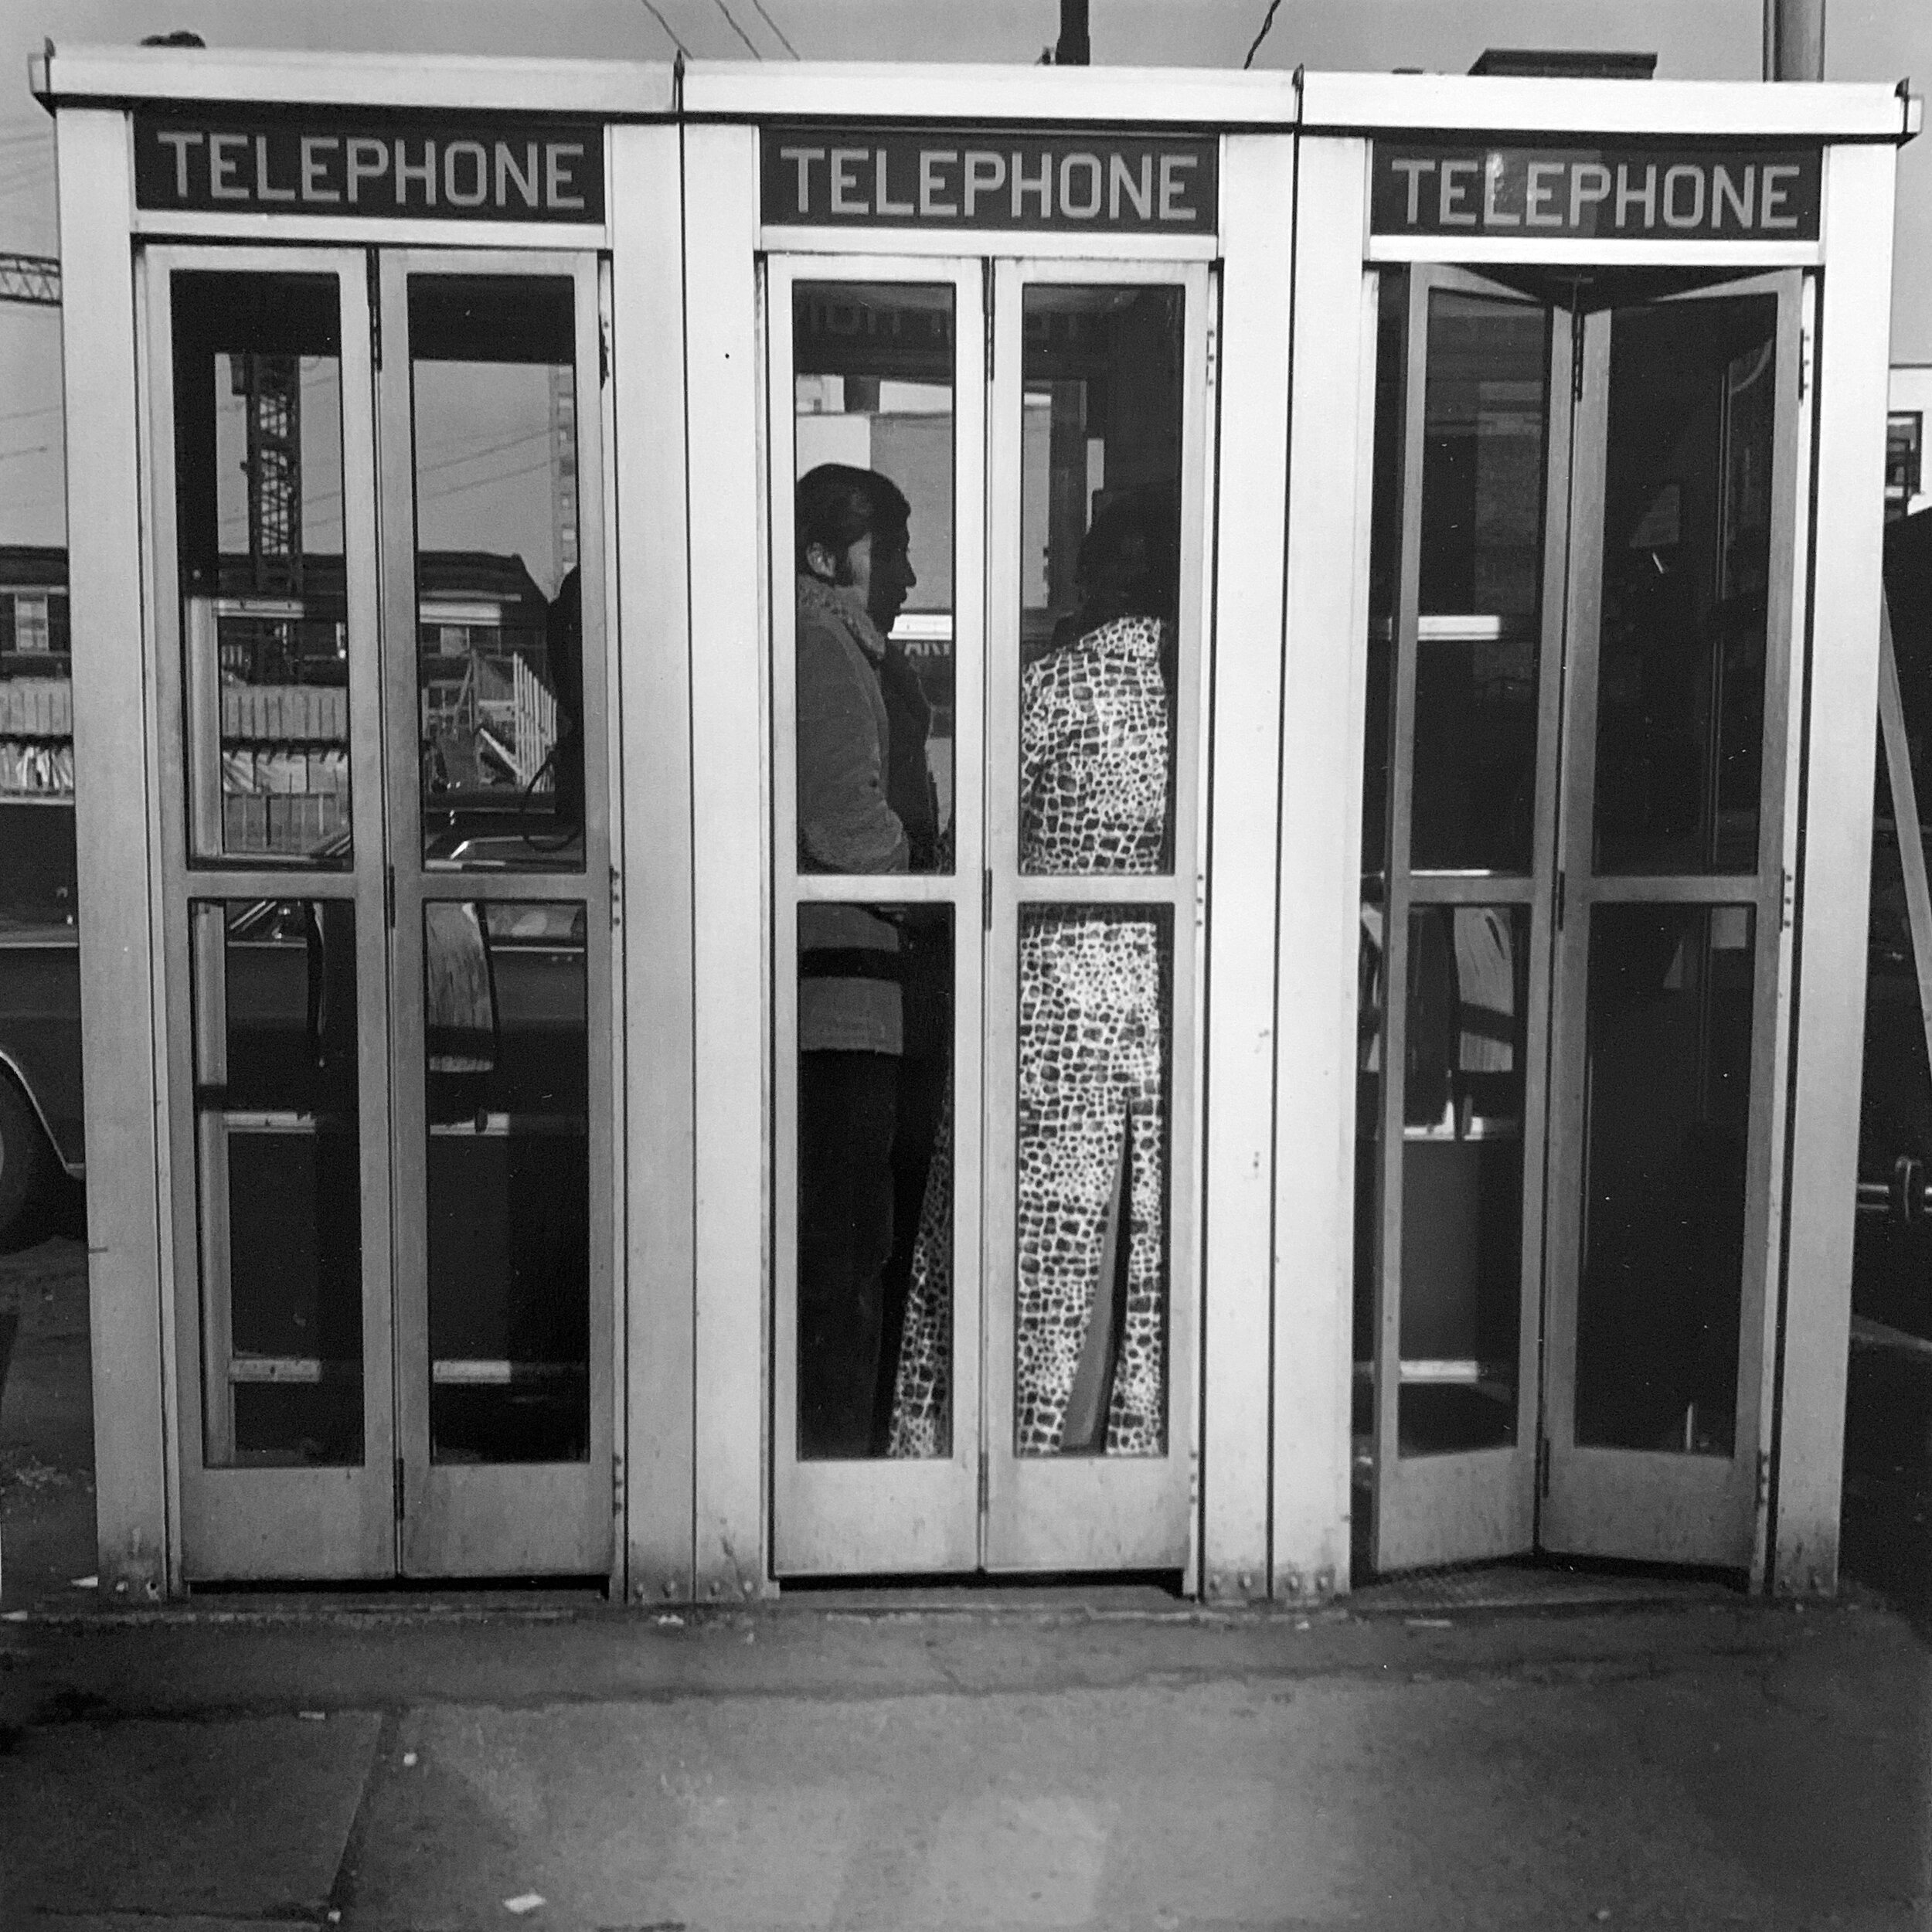 Couple in Phone Booth, Montreal, 1970, VINTAGE PRINT